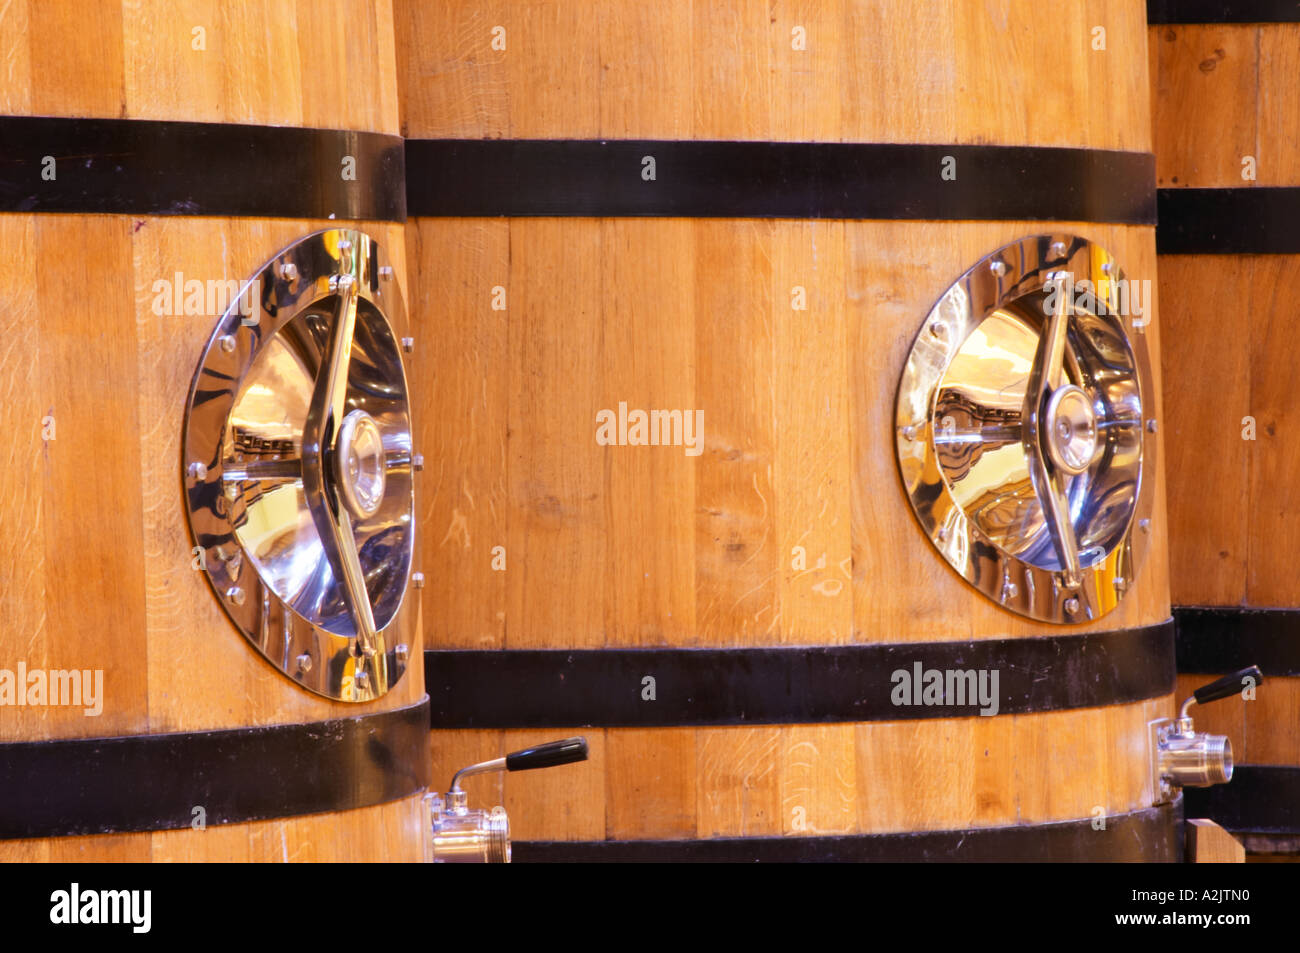 Detail of wooden fermentation tanks vats with a polished stainless steel door, Maison Louis Jadot, Beaune Côte Cote d Or Bourgogne Burgundy Burgundian France French Europe European Stock Photo